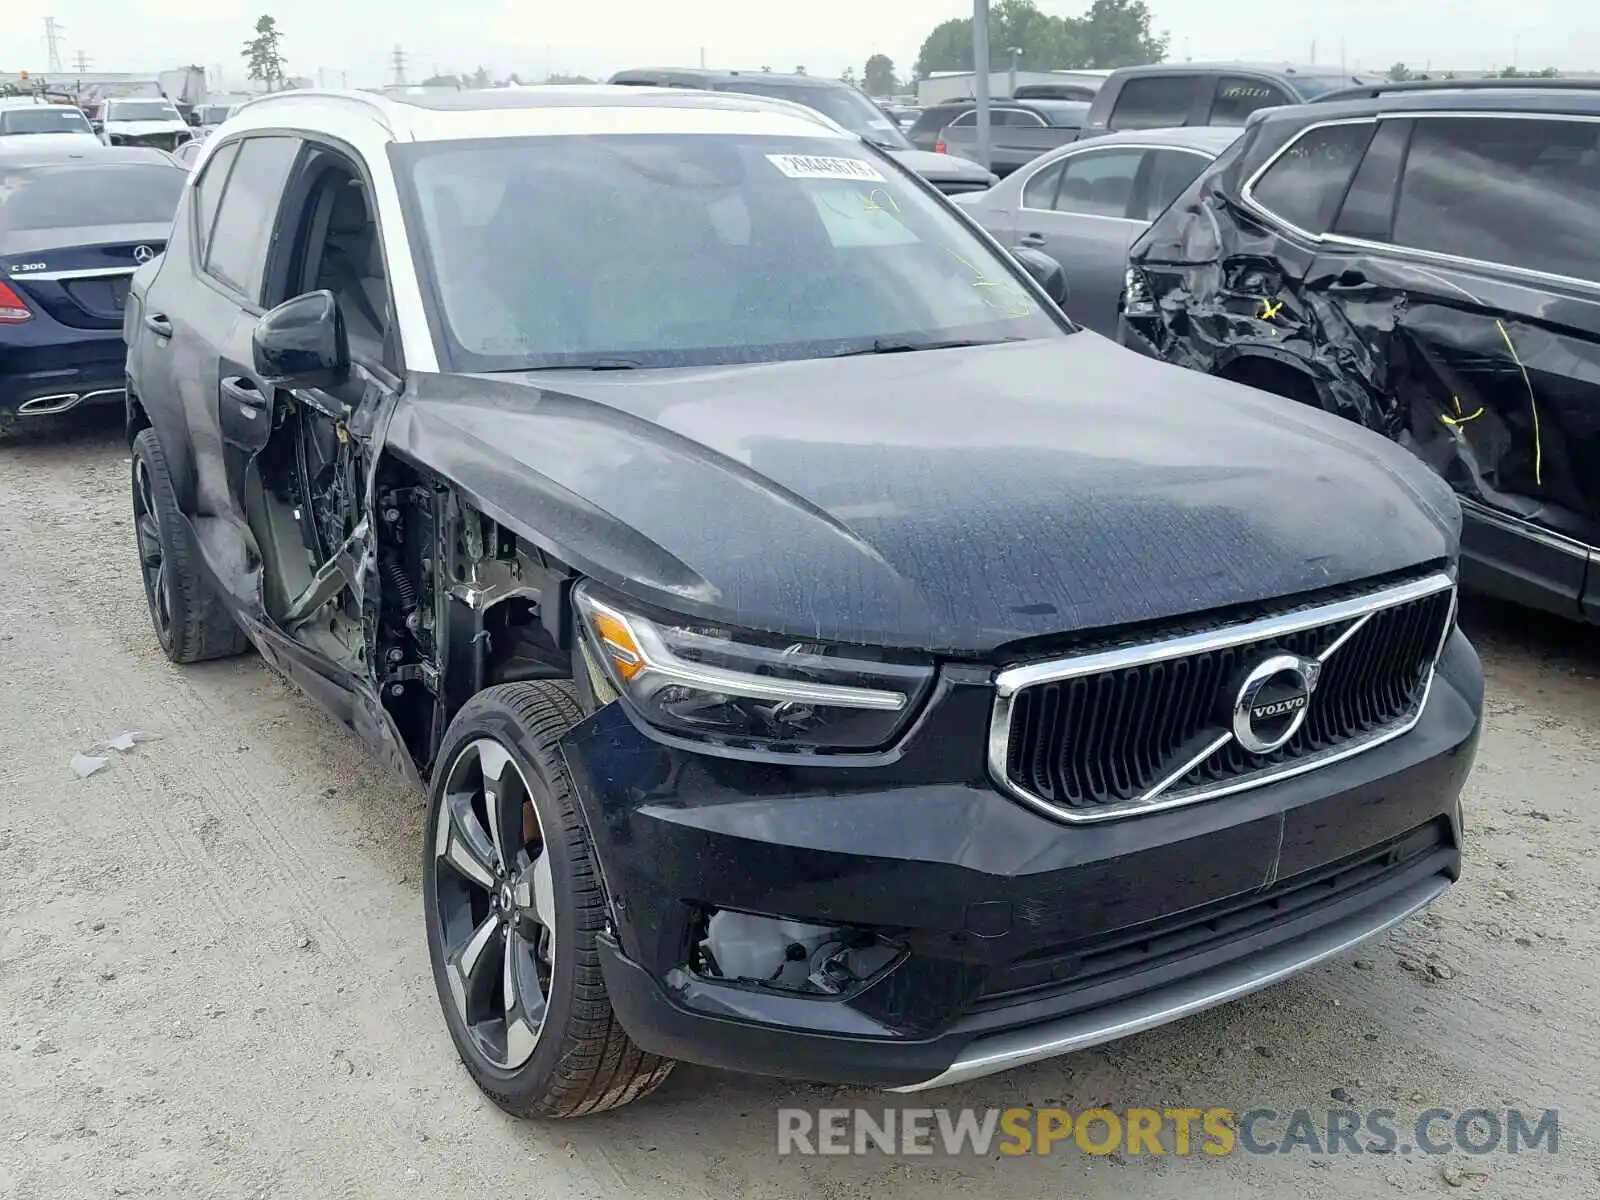 1 Photograph of a damaged car YV4162UK2K2057993 VOLVO XC40 T5 2019